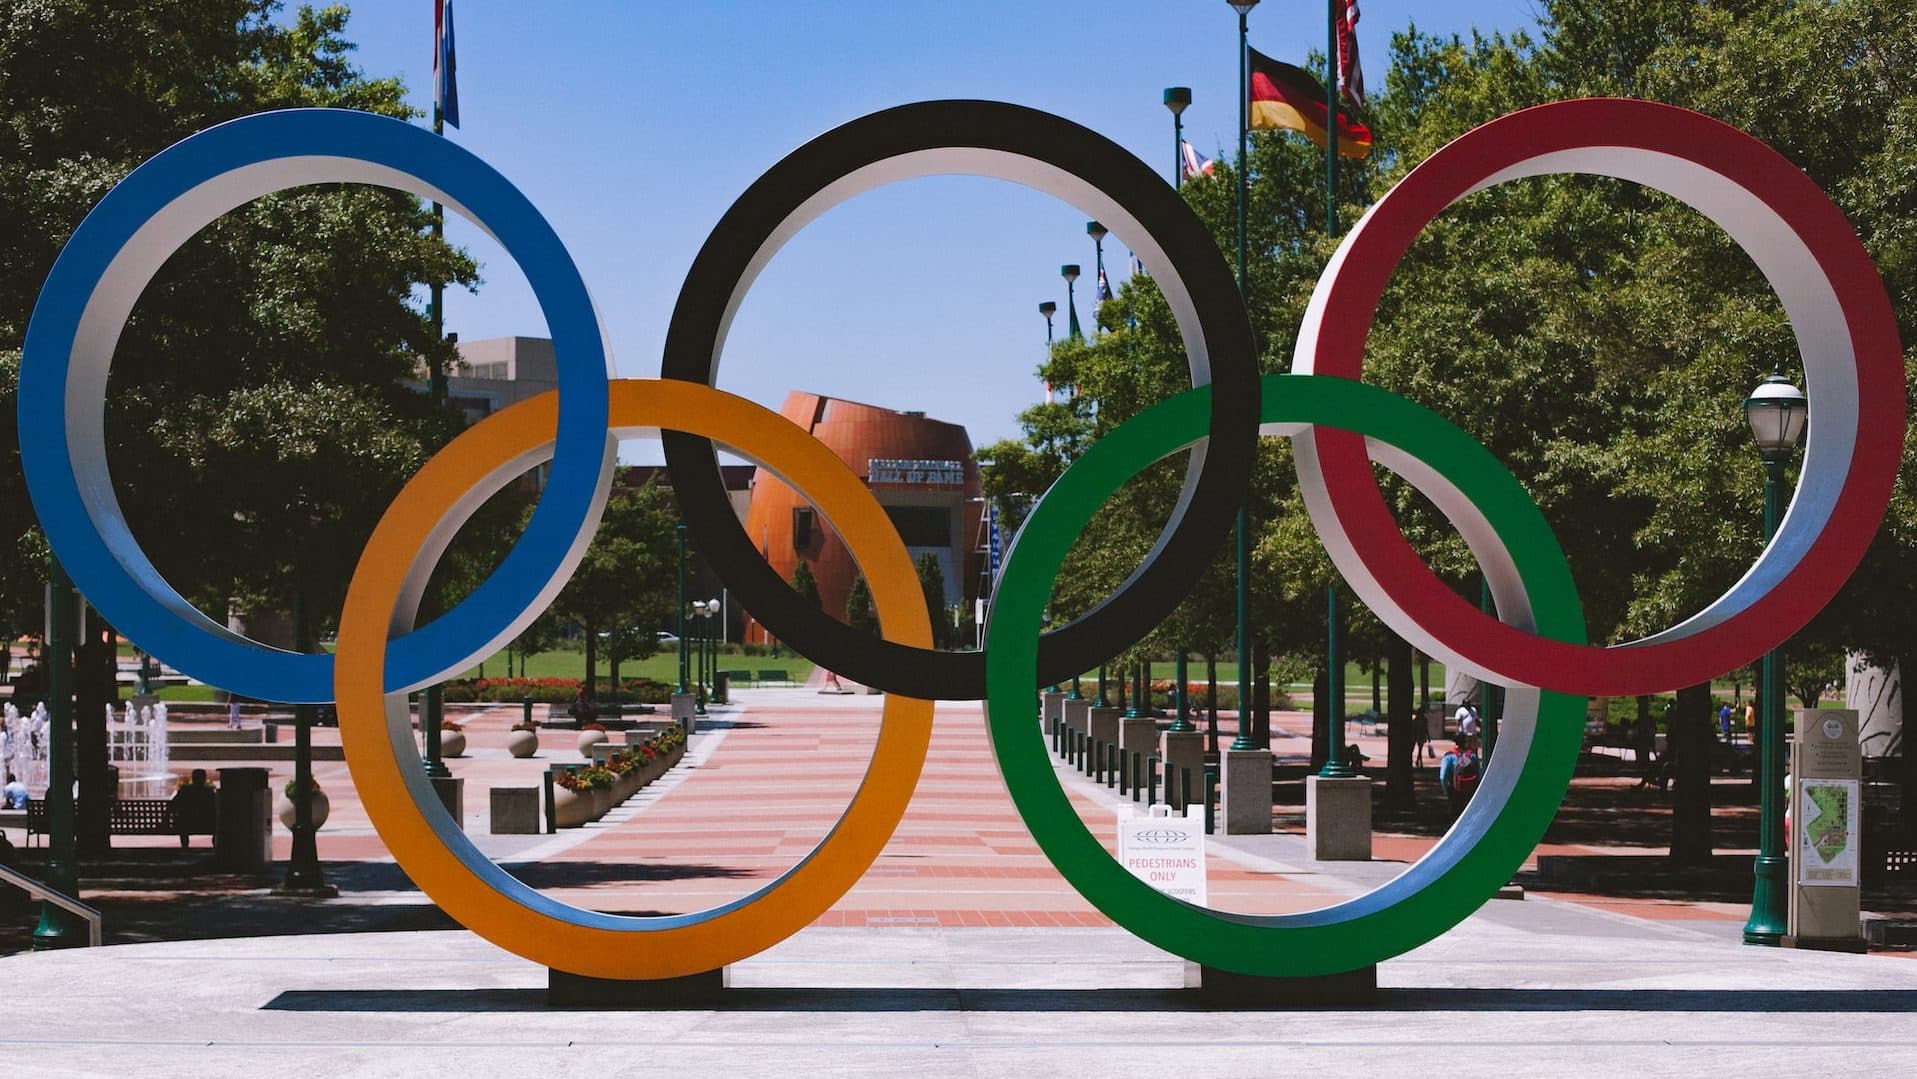 Located Downtown, Centennial Olympic Park was home to the 1996 Summer Olympics